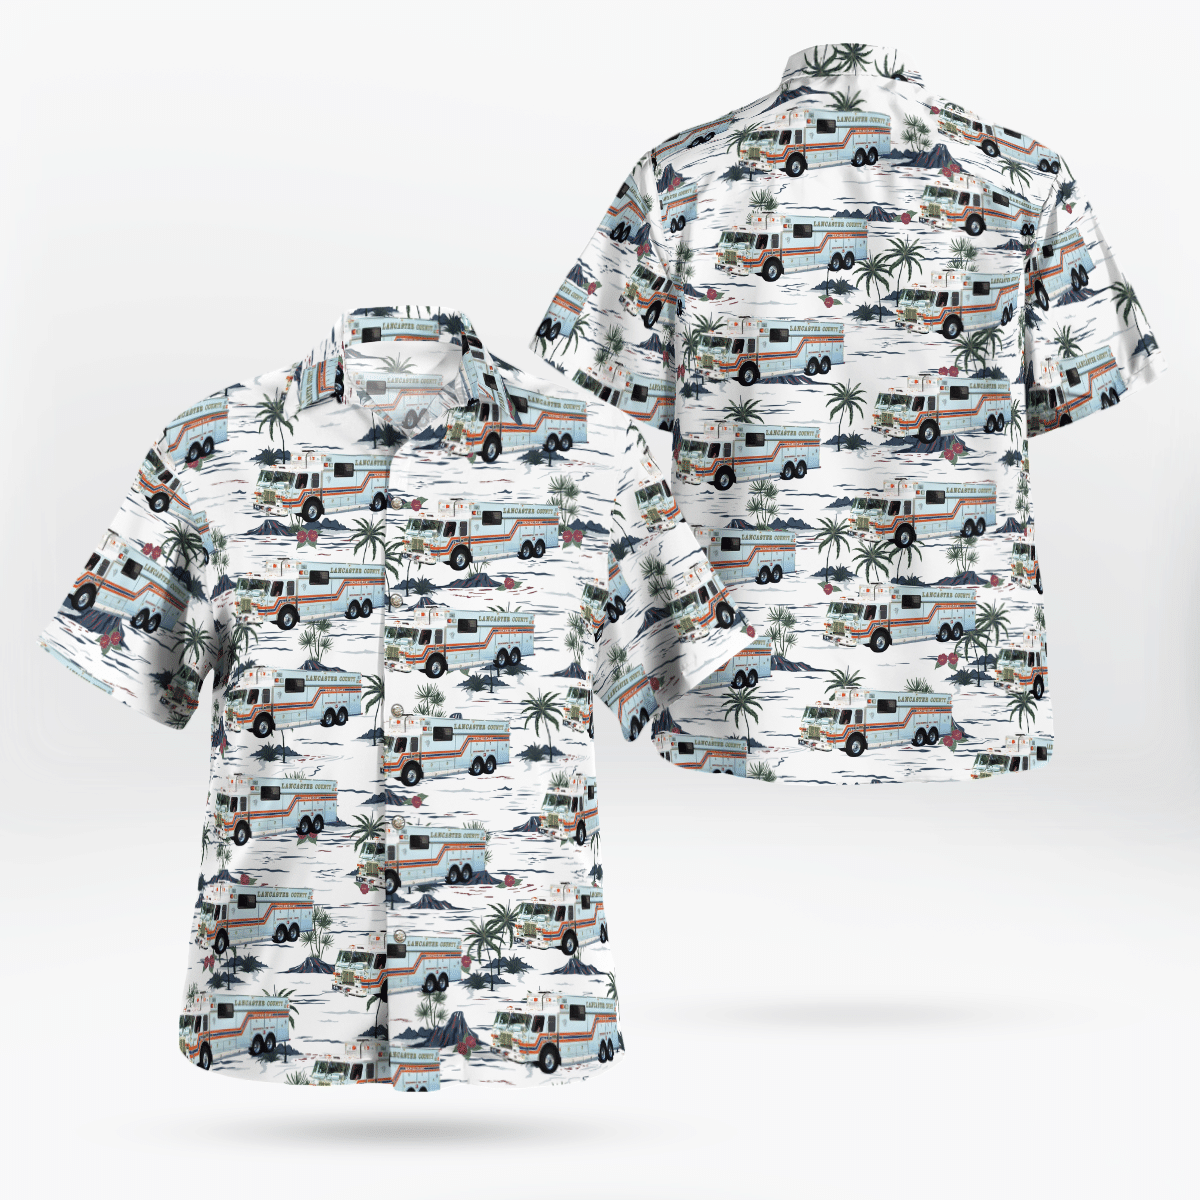 If you are in need of a new summertime look, pick up this Hawaiian shirt 24